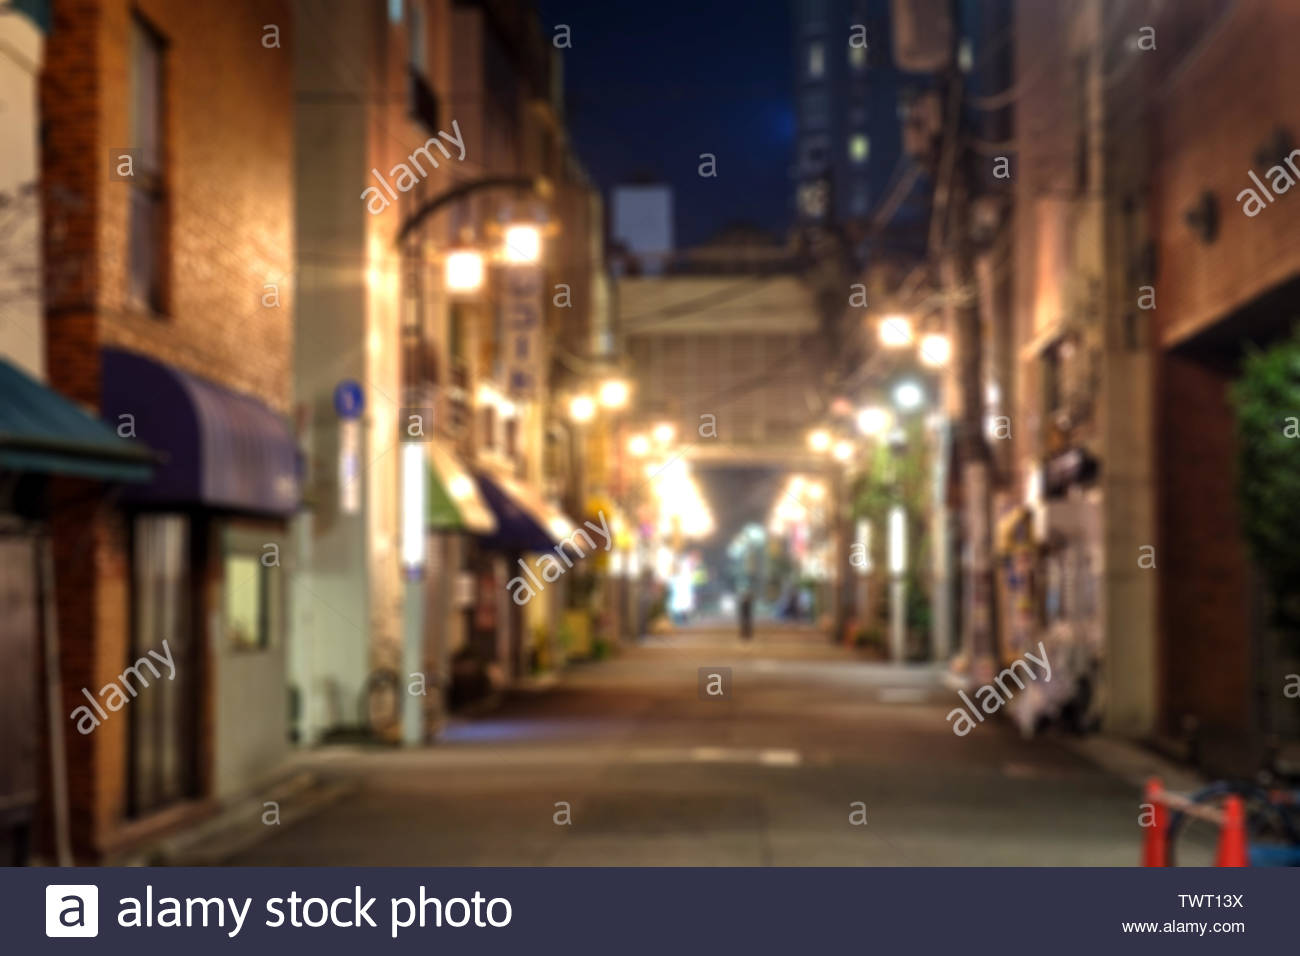 Blurred Scene Of Alleyway With Light Glowing At Night Background